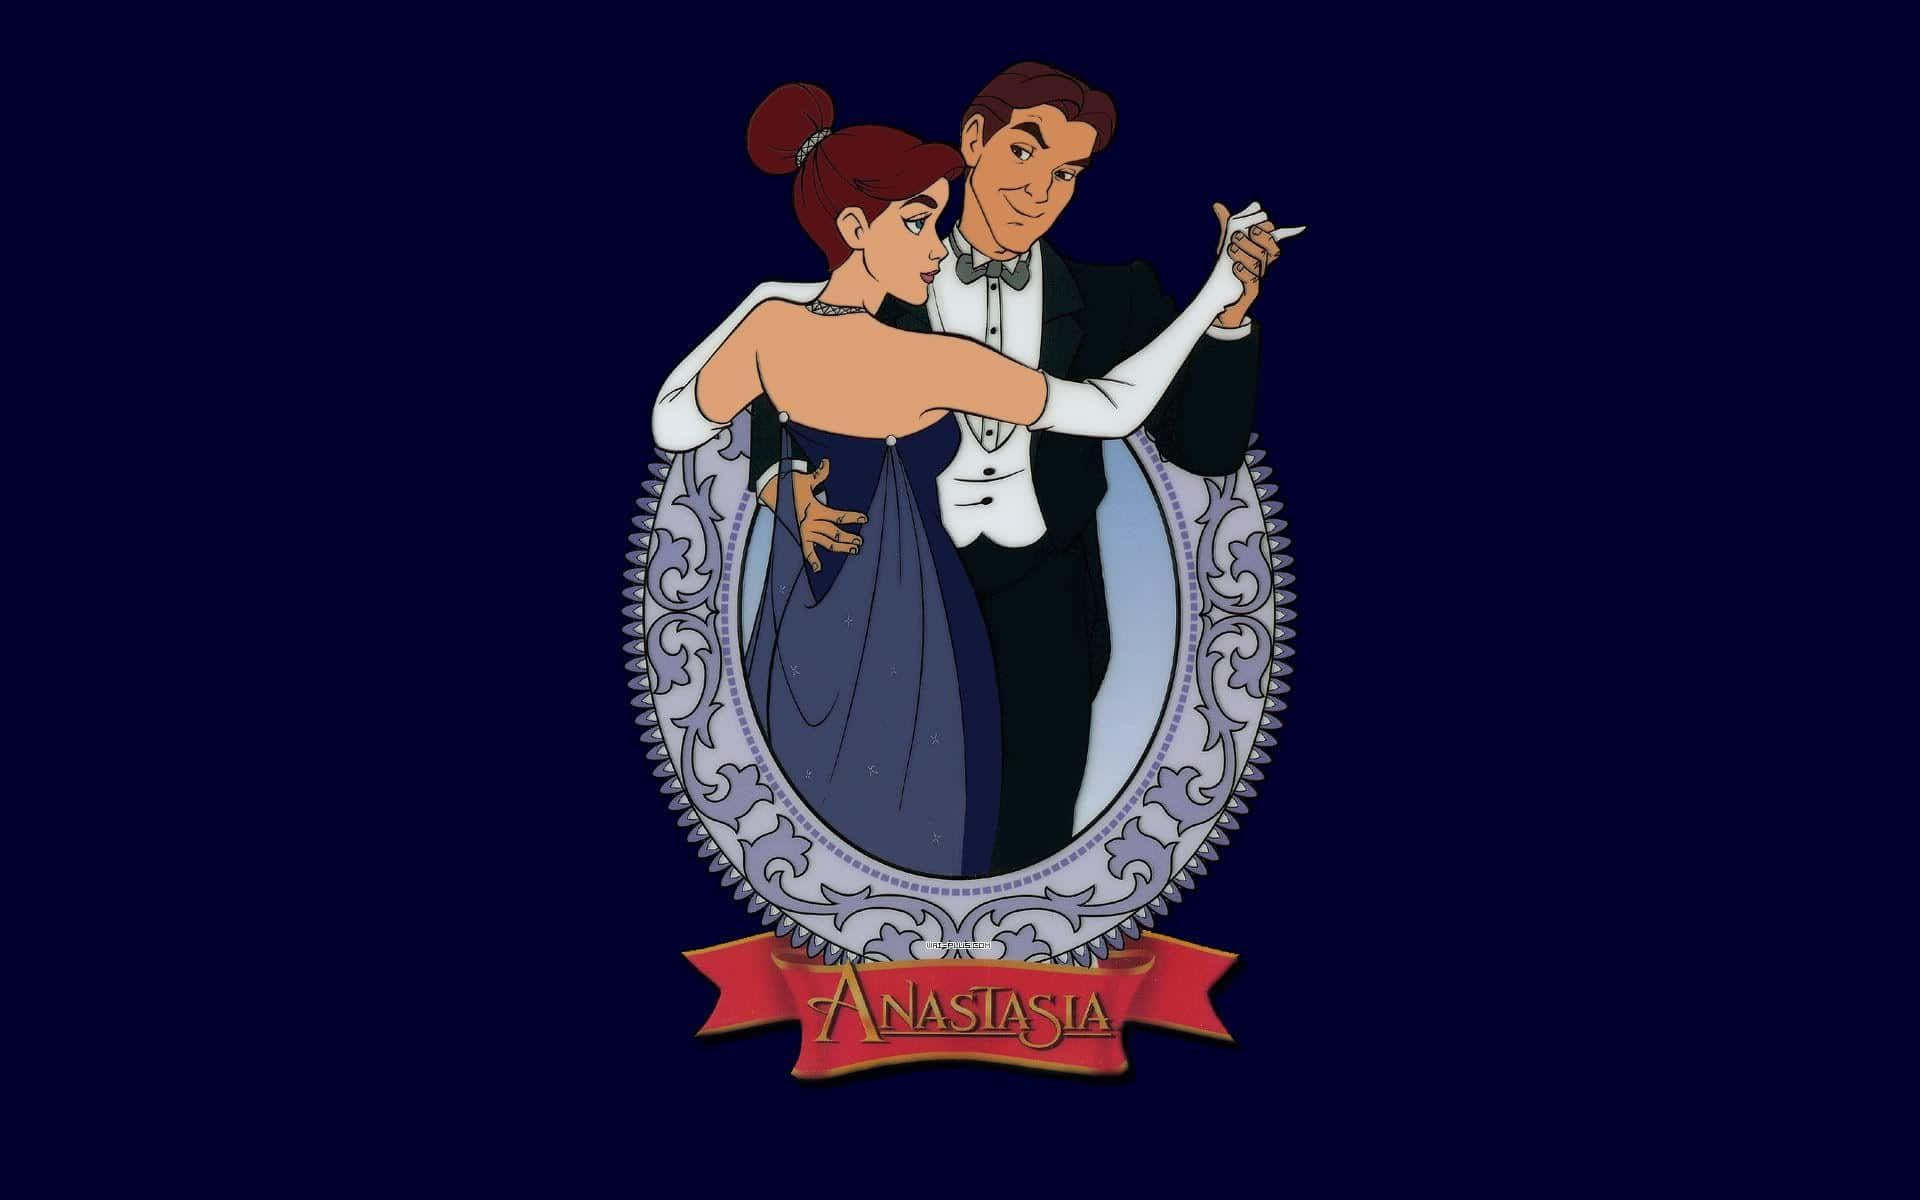 A Cartoon Of A Couple In Formal Attire